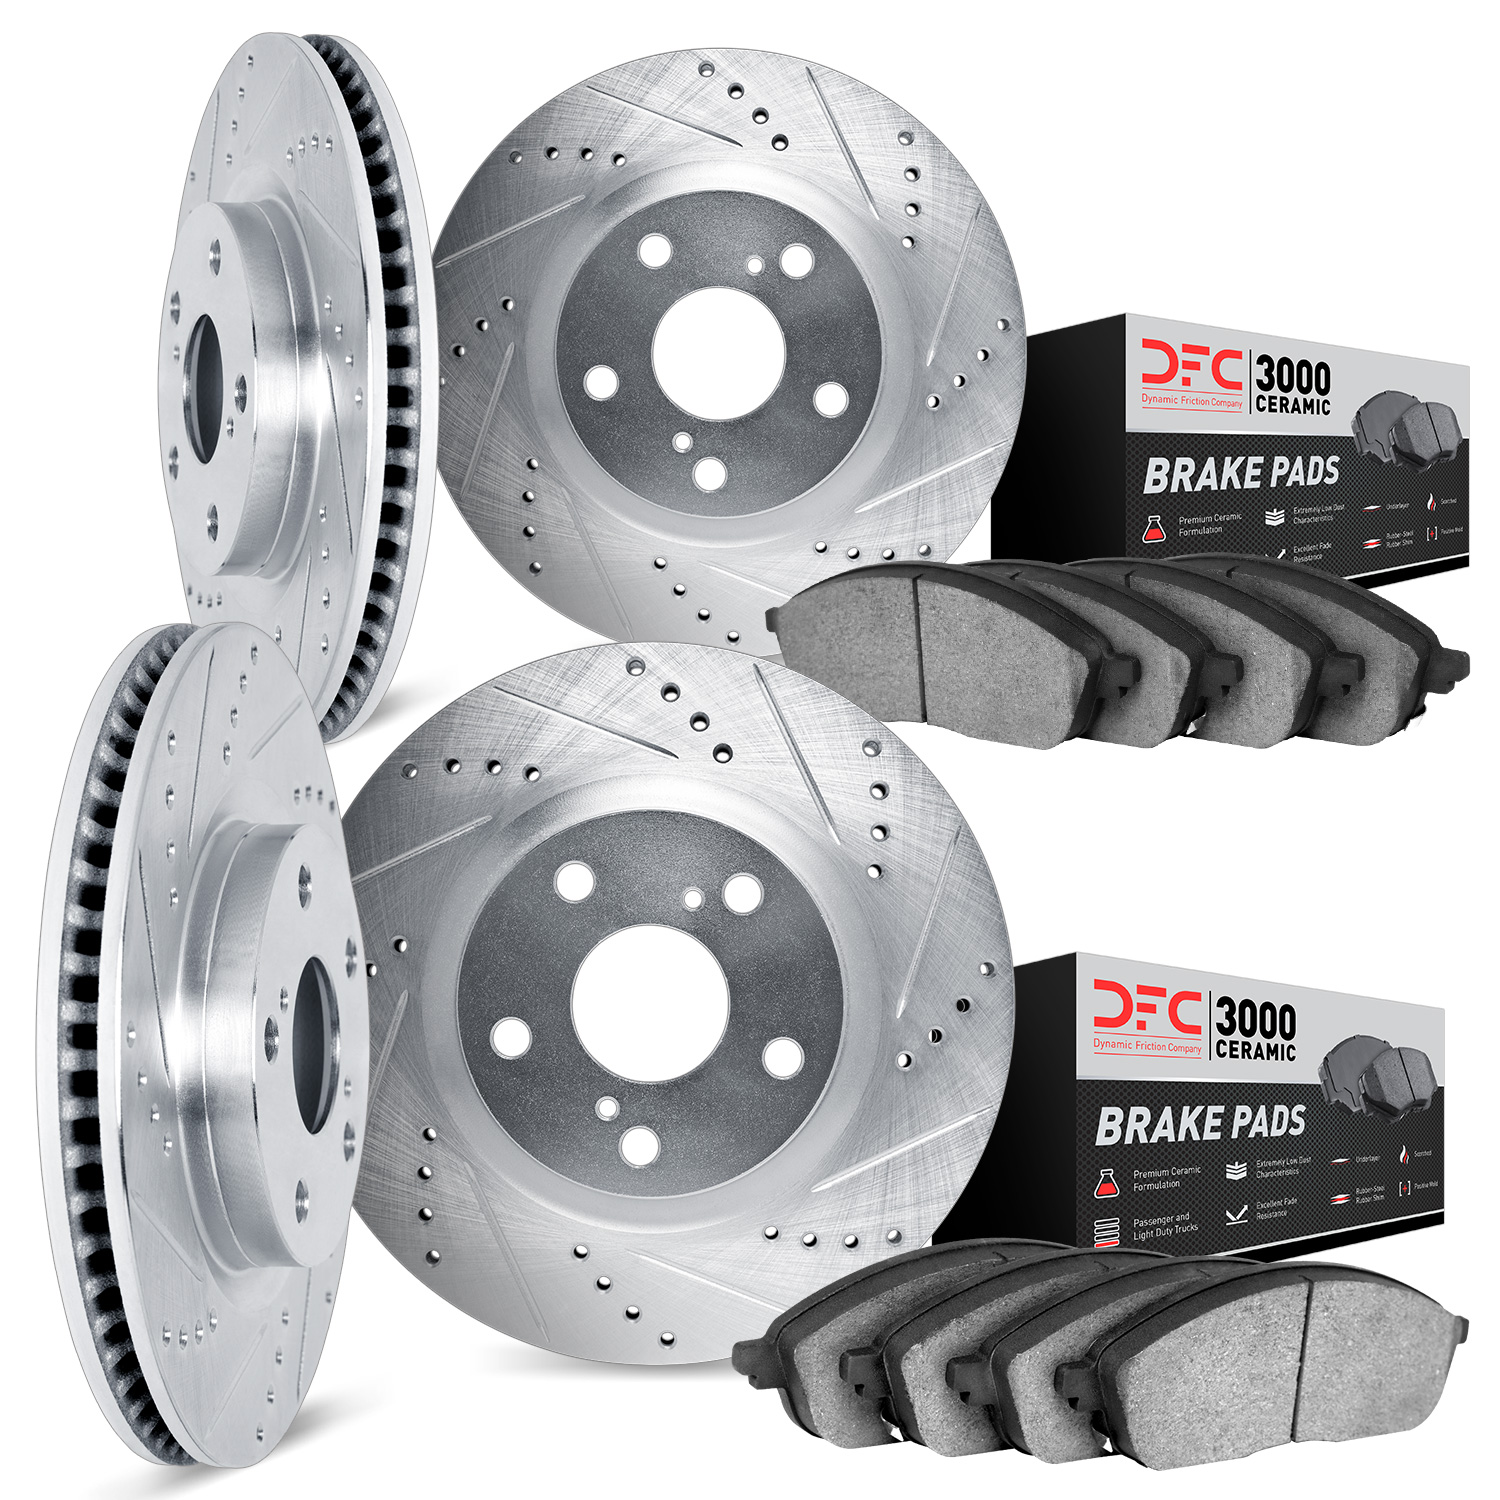 7304-54069 Drilled/Slotted Brake Rotor with 3000-Series Ceramic Brake Pads Kit [Silver], 2004-2007 Ford/Lincoln/Mercury/Mazda, P